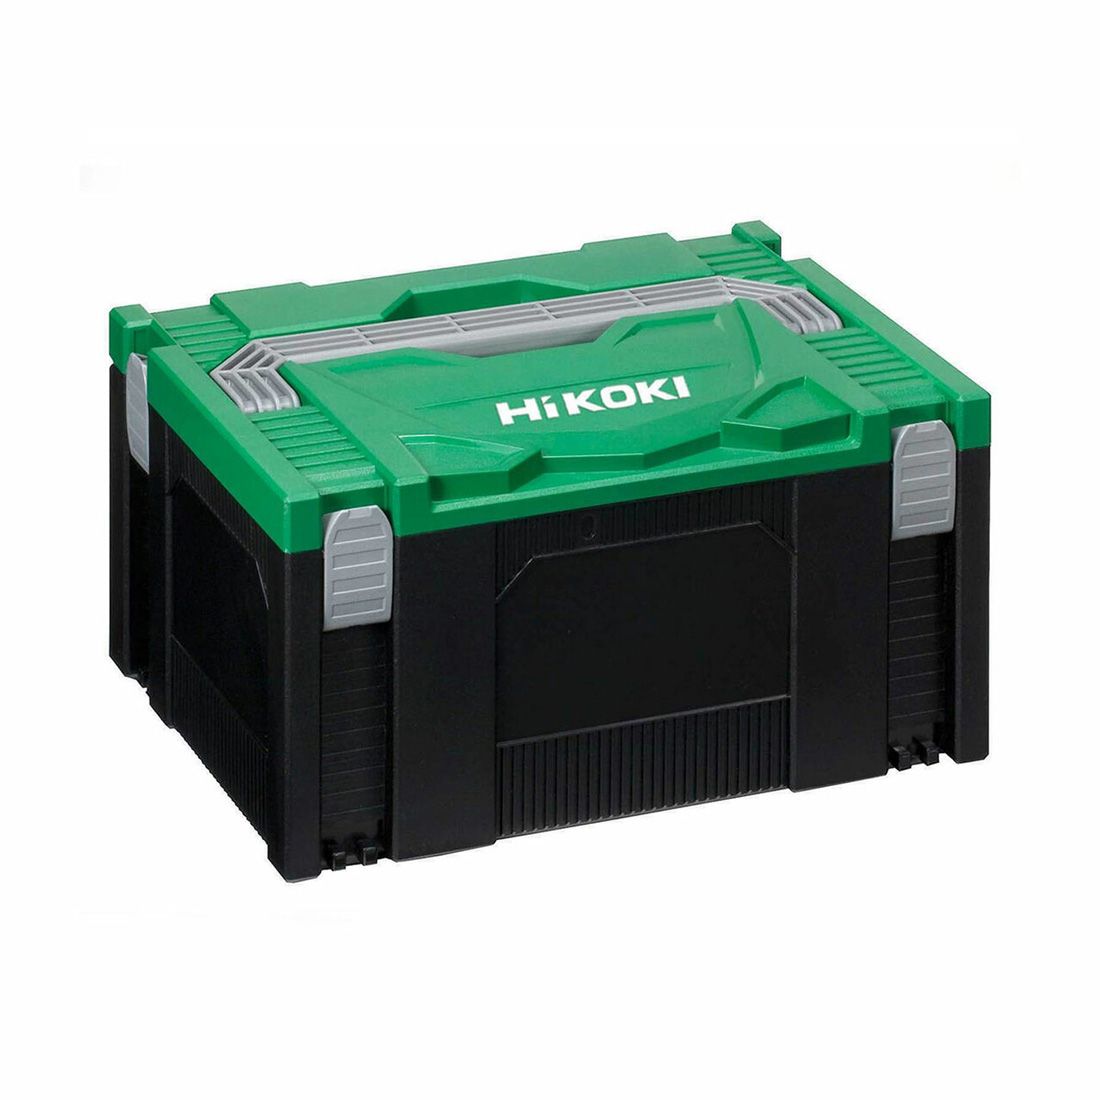 Hikoki 402540 Type 3 Stackable System Case with Upper Sponge Inlay